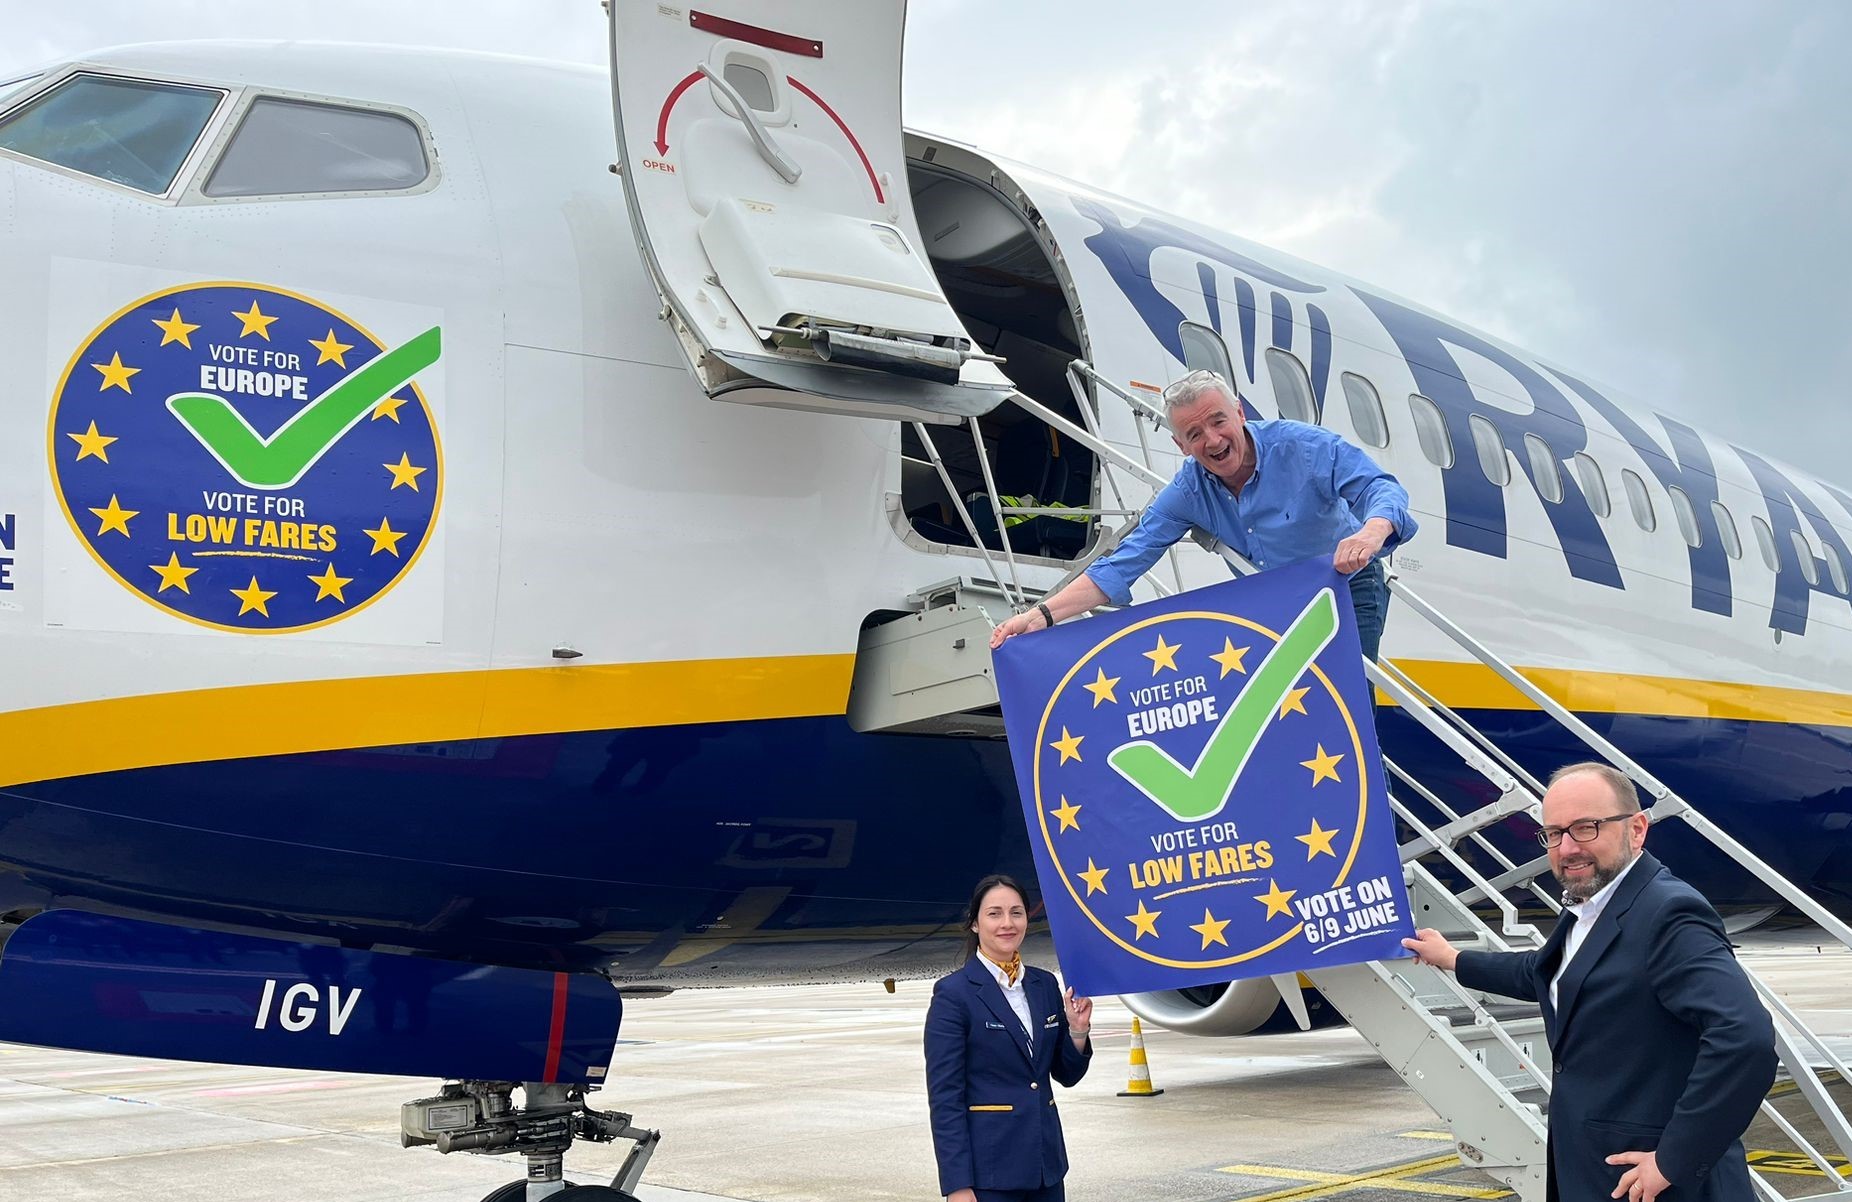 RYANAIR ENCOURAGES ALL EU CITIZENS TO VOTE IN THE EU ELECTIONS ON 6 – 9 JUNE